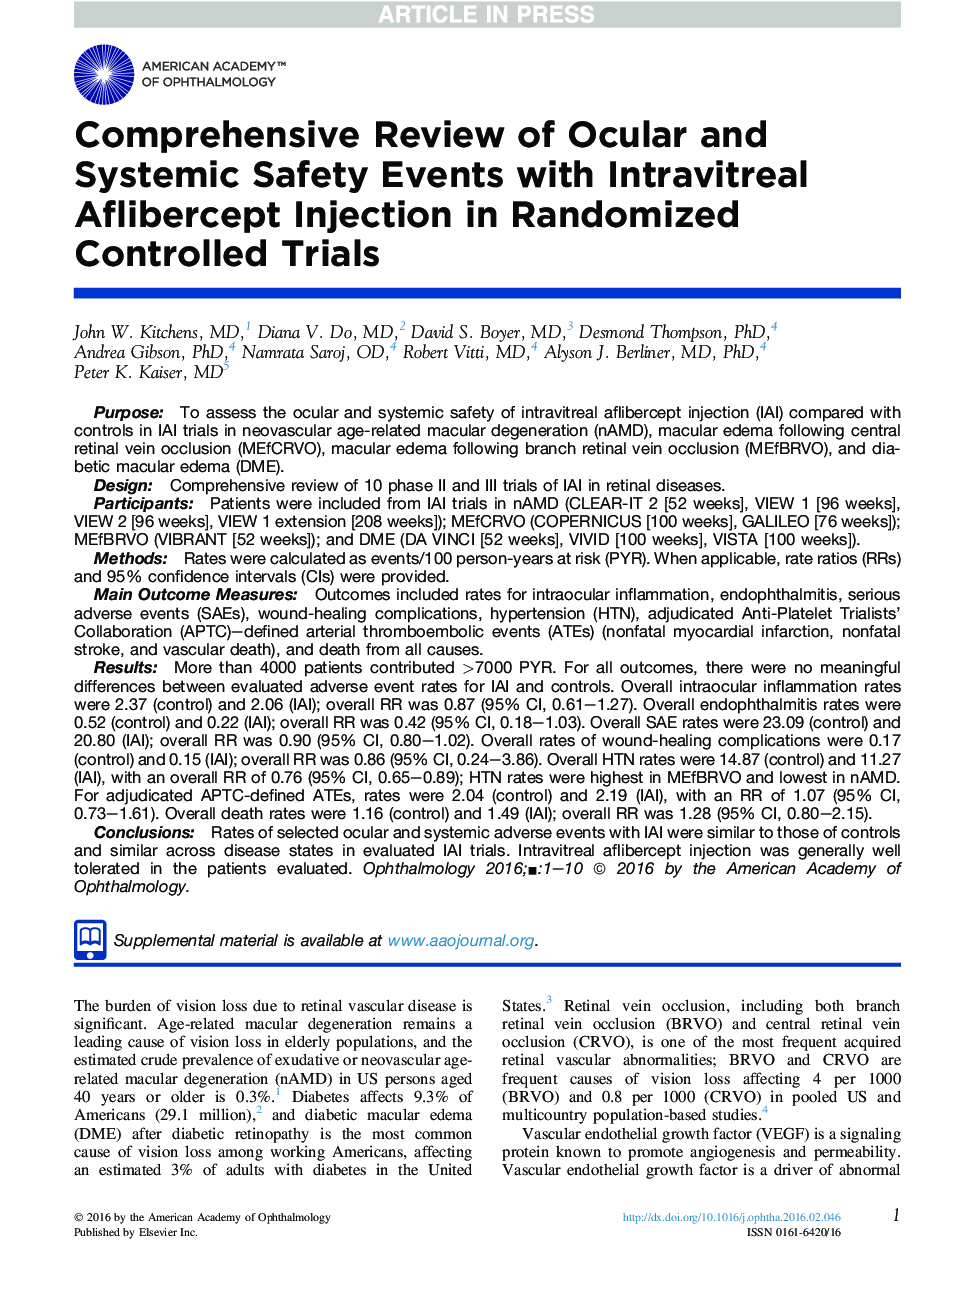 Comprehensive Review of Ocular and Systemic Safety Events with Intravitreal Aflibercept Injection in Randomized Controlled Trials